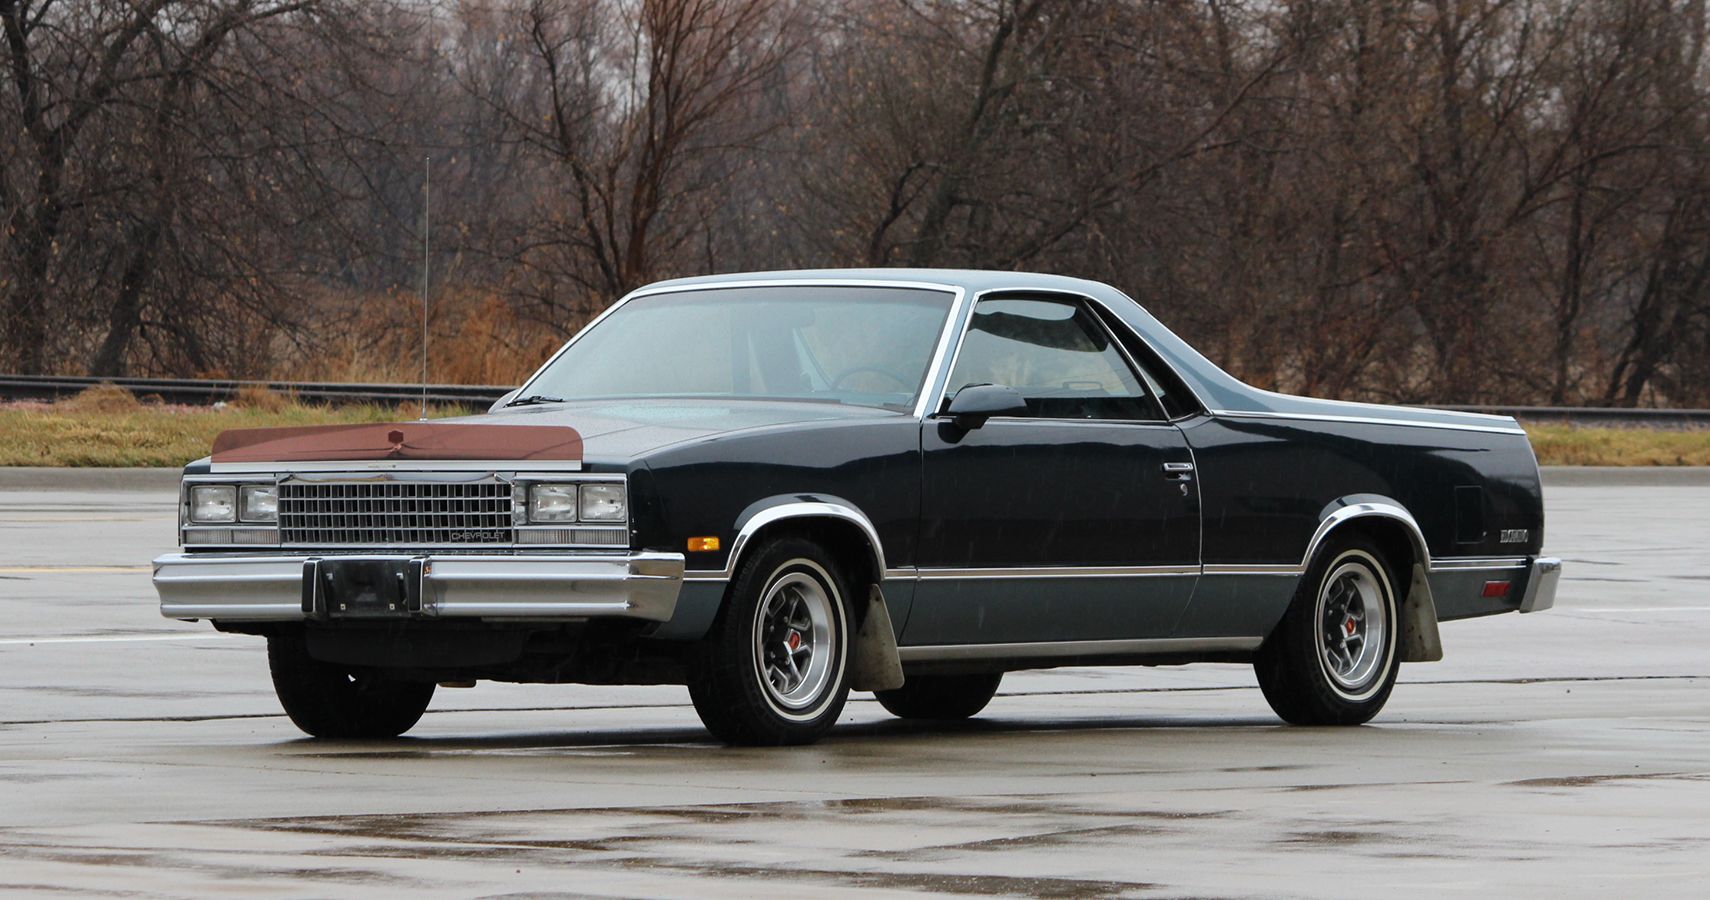 The Fourth And Fifth Generations Are The Most Economical Of All Chevy El Camino Classics, Some Coming In At Even Lower Than $10,000